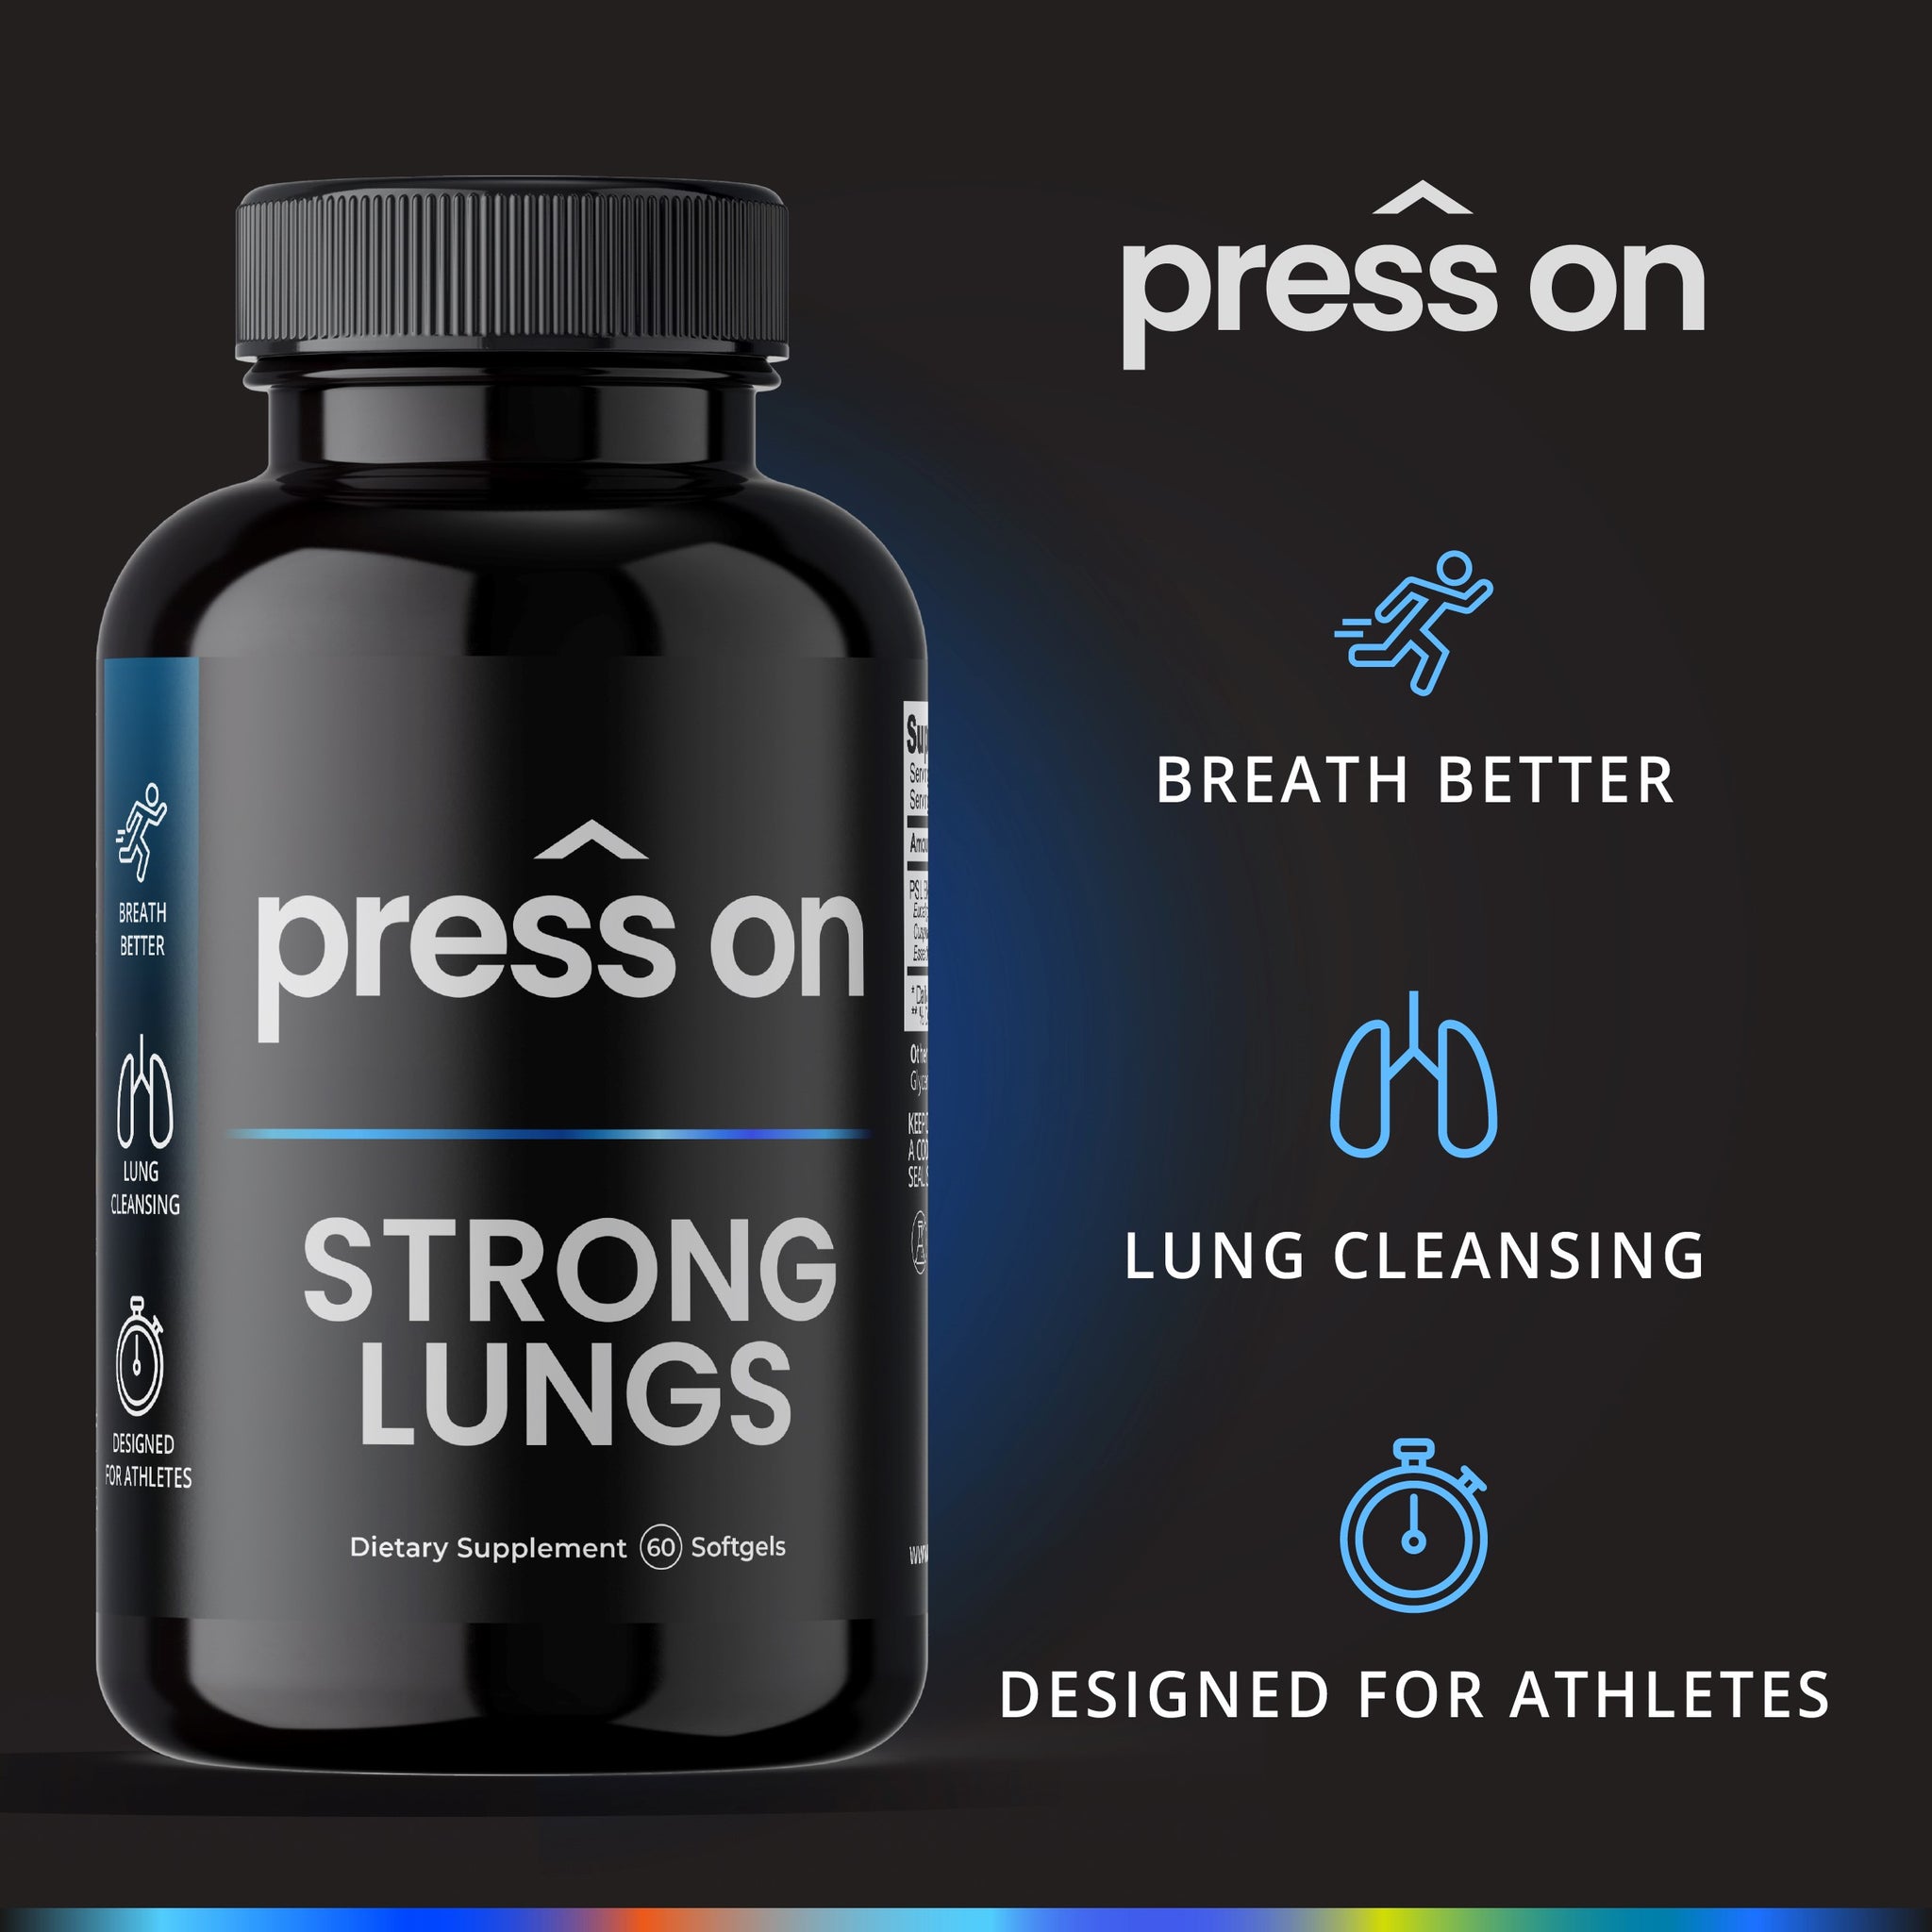 Strong Lungs Detox Support Respiratory Health